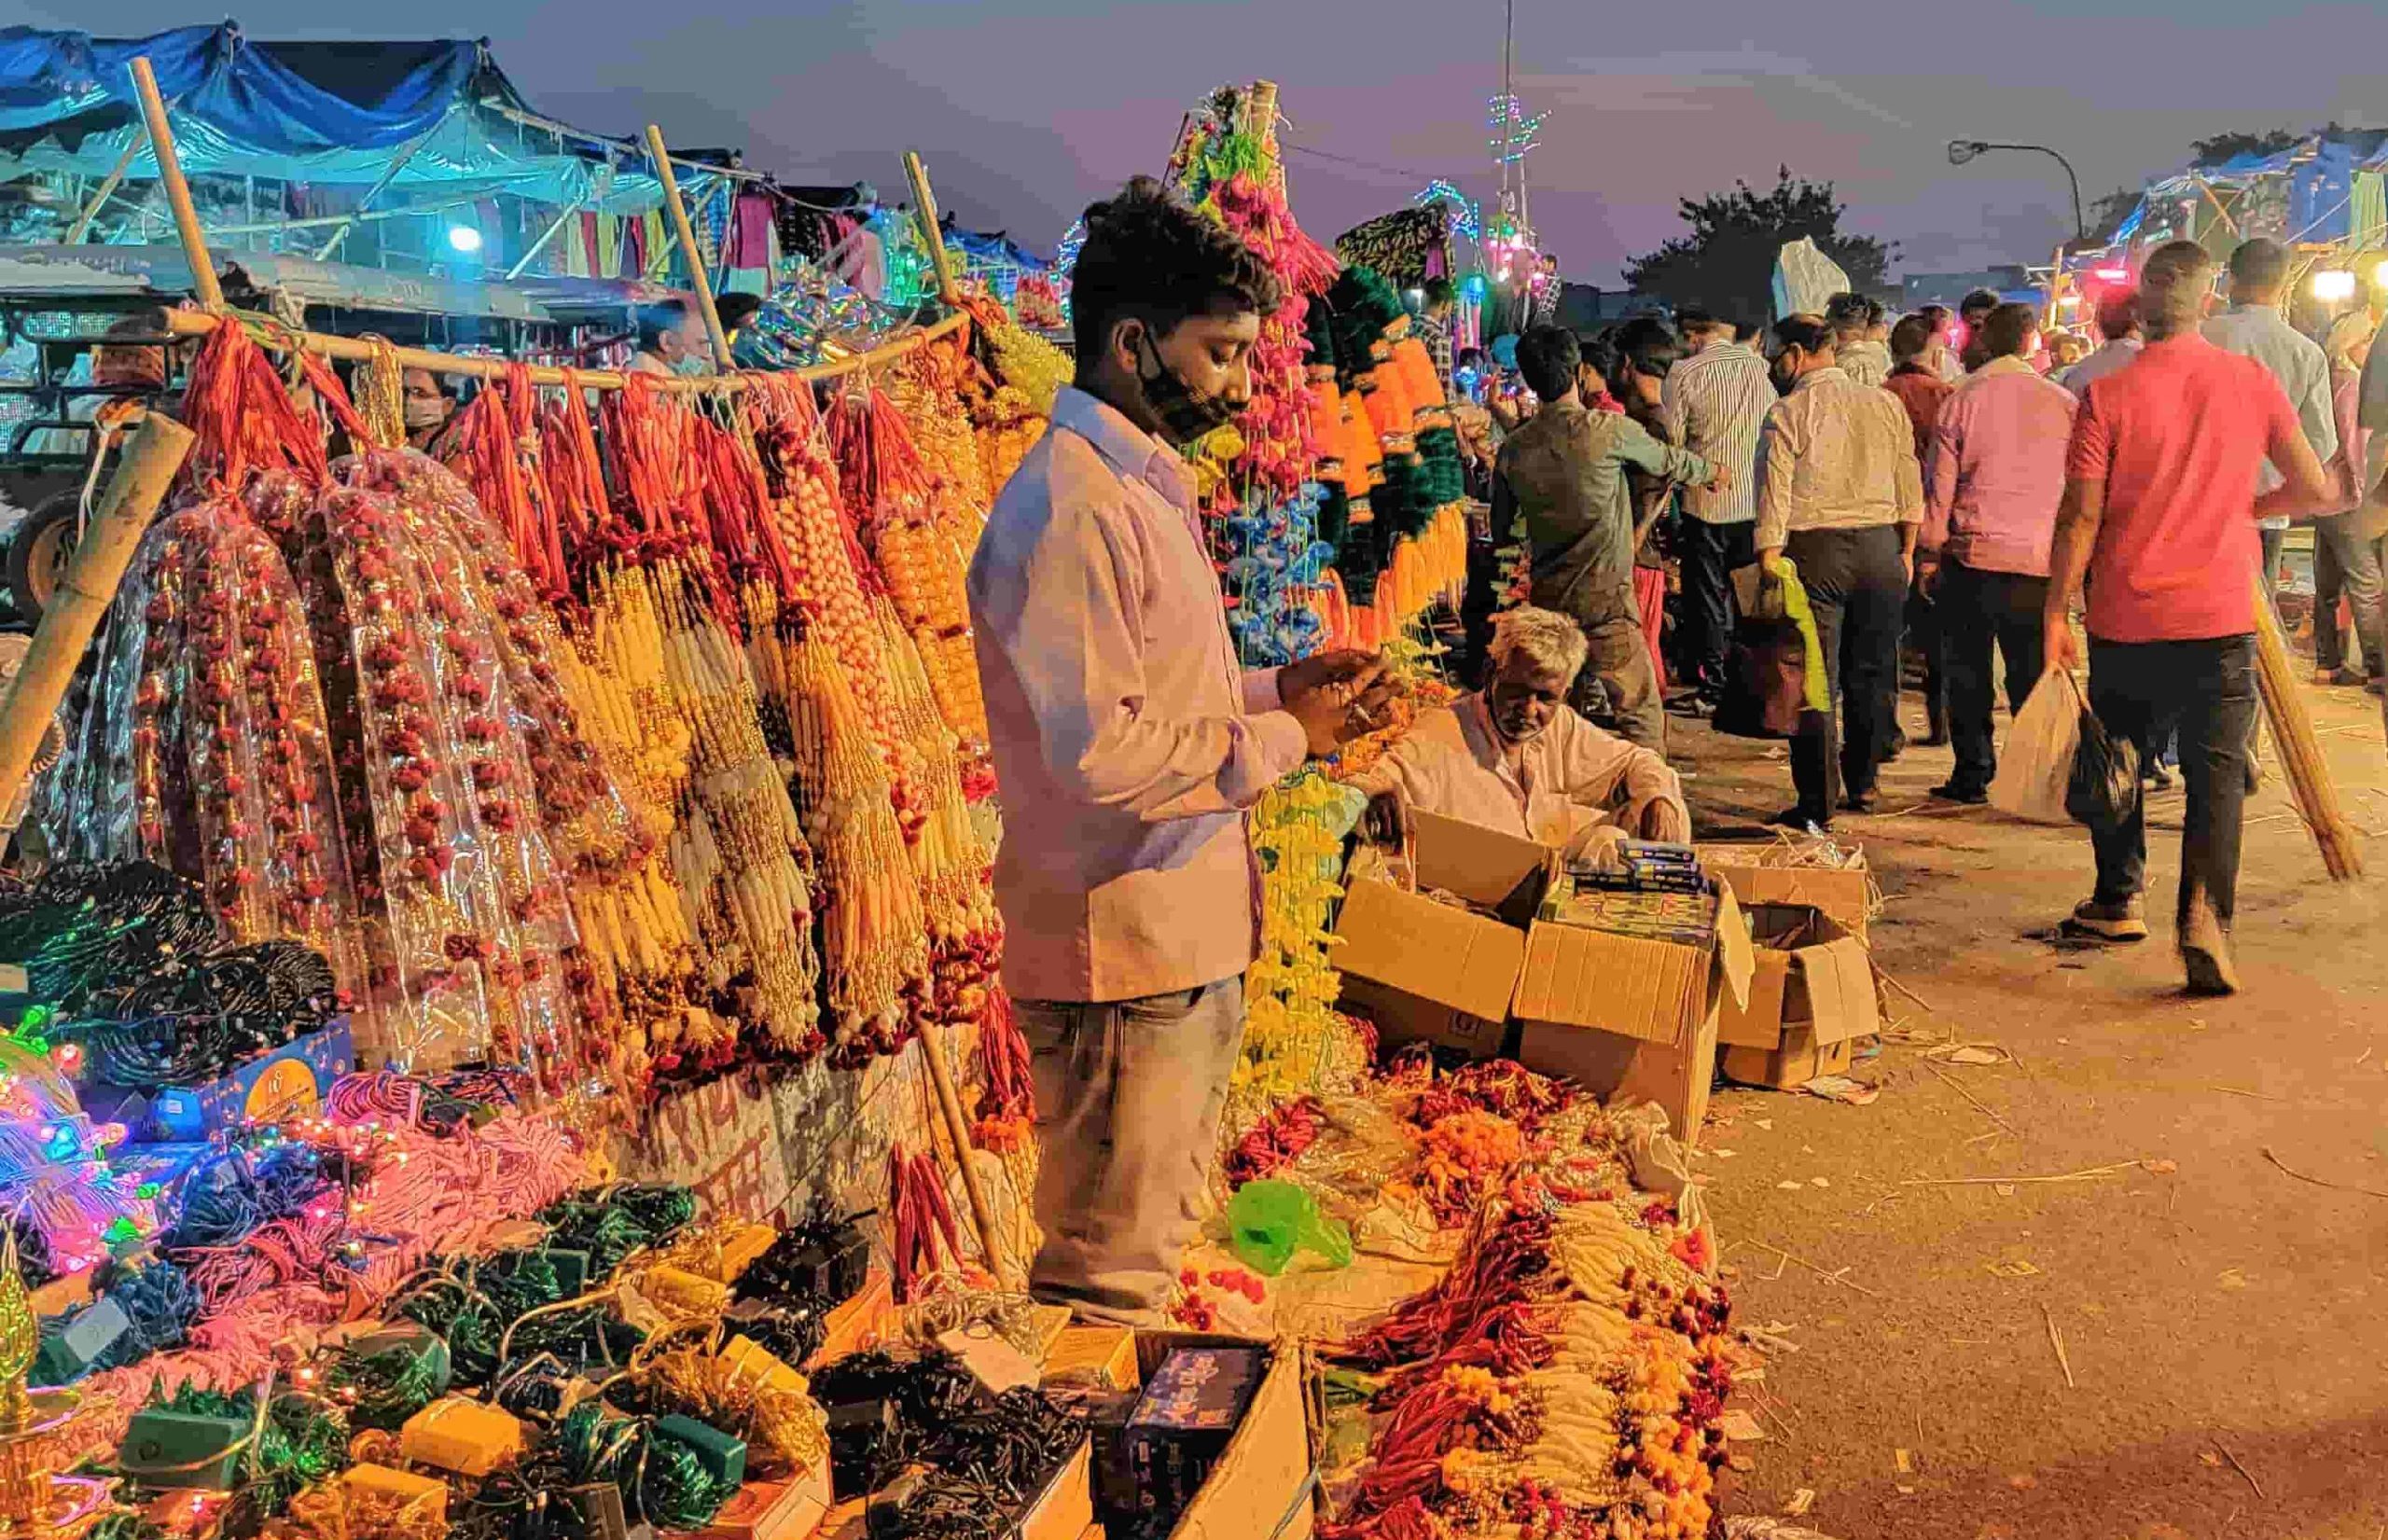 No firecrackers, no sales; ban has traders in a spot